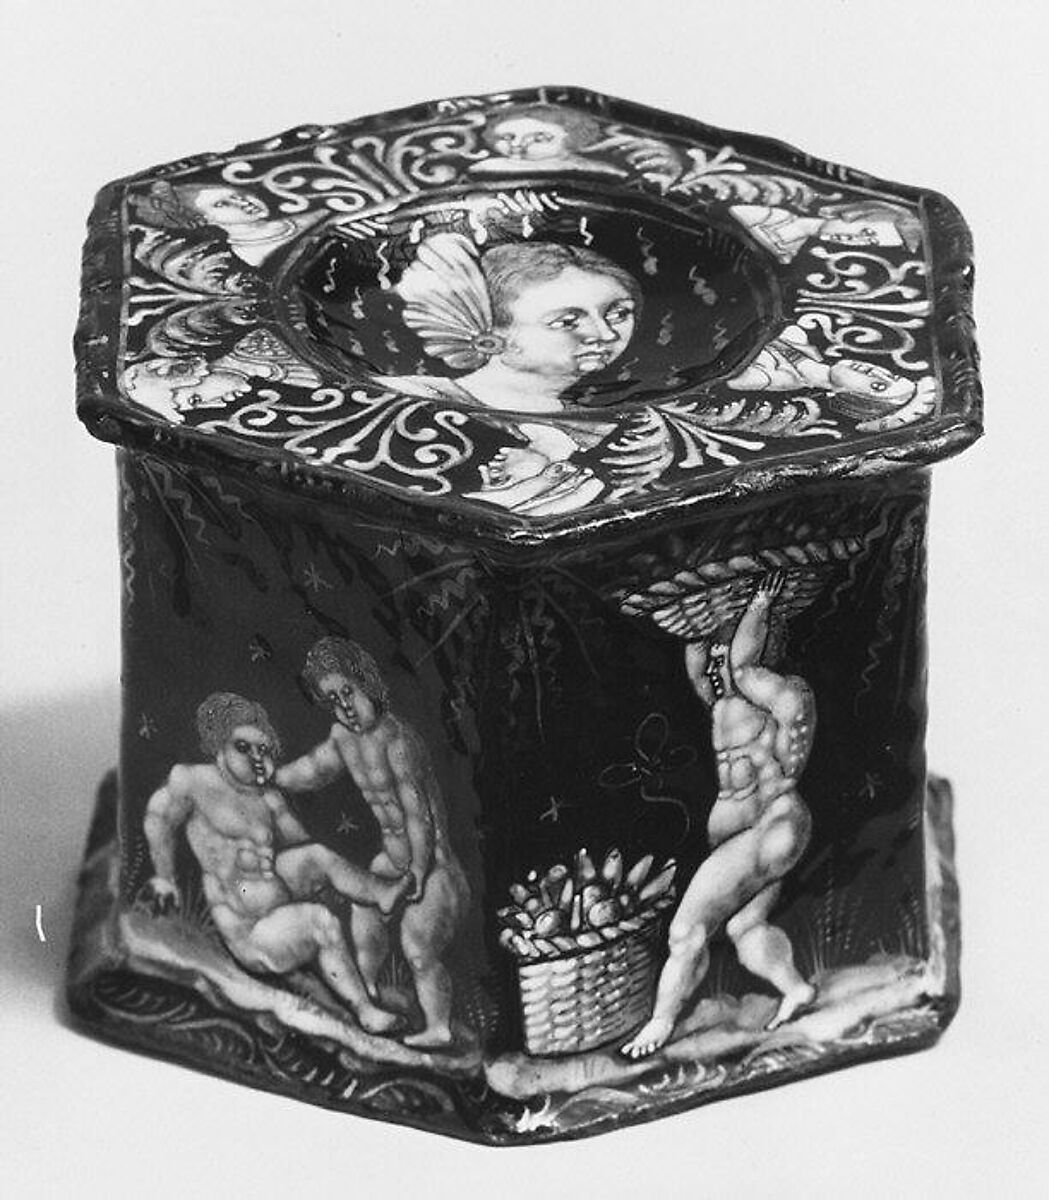 Saltcellar with scene of infant harvesters (one of a pair), Attributed to Pierre Reymond (born 1513, working 1537, died after 1584), Painted enamel on copper, partly gilt, French, Limoges 